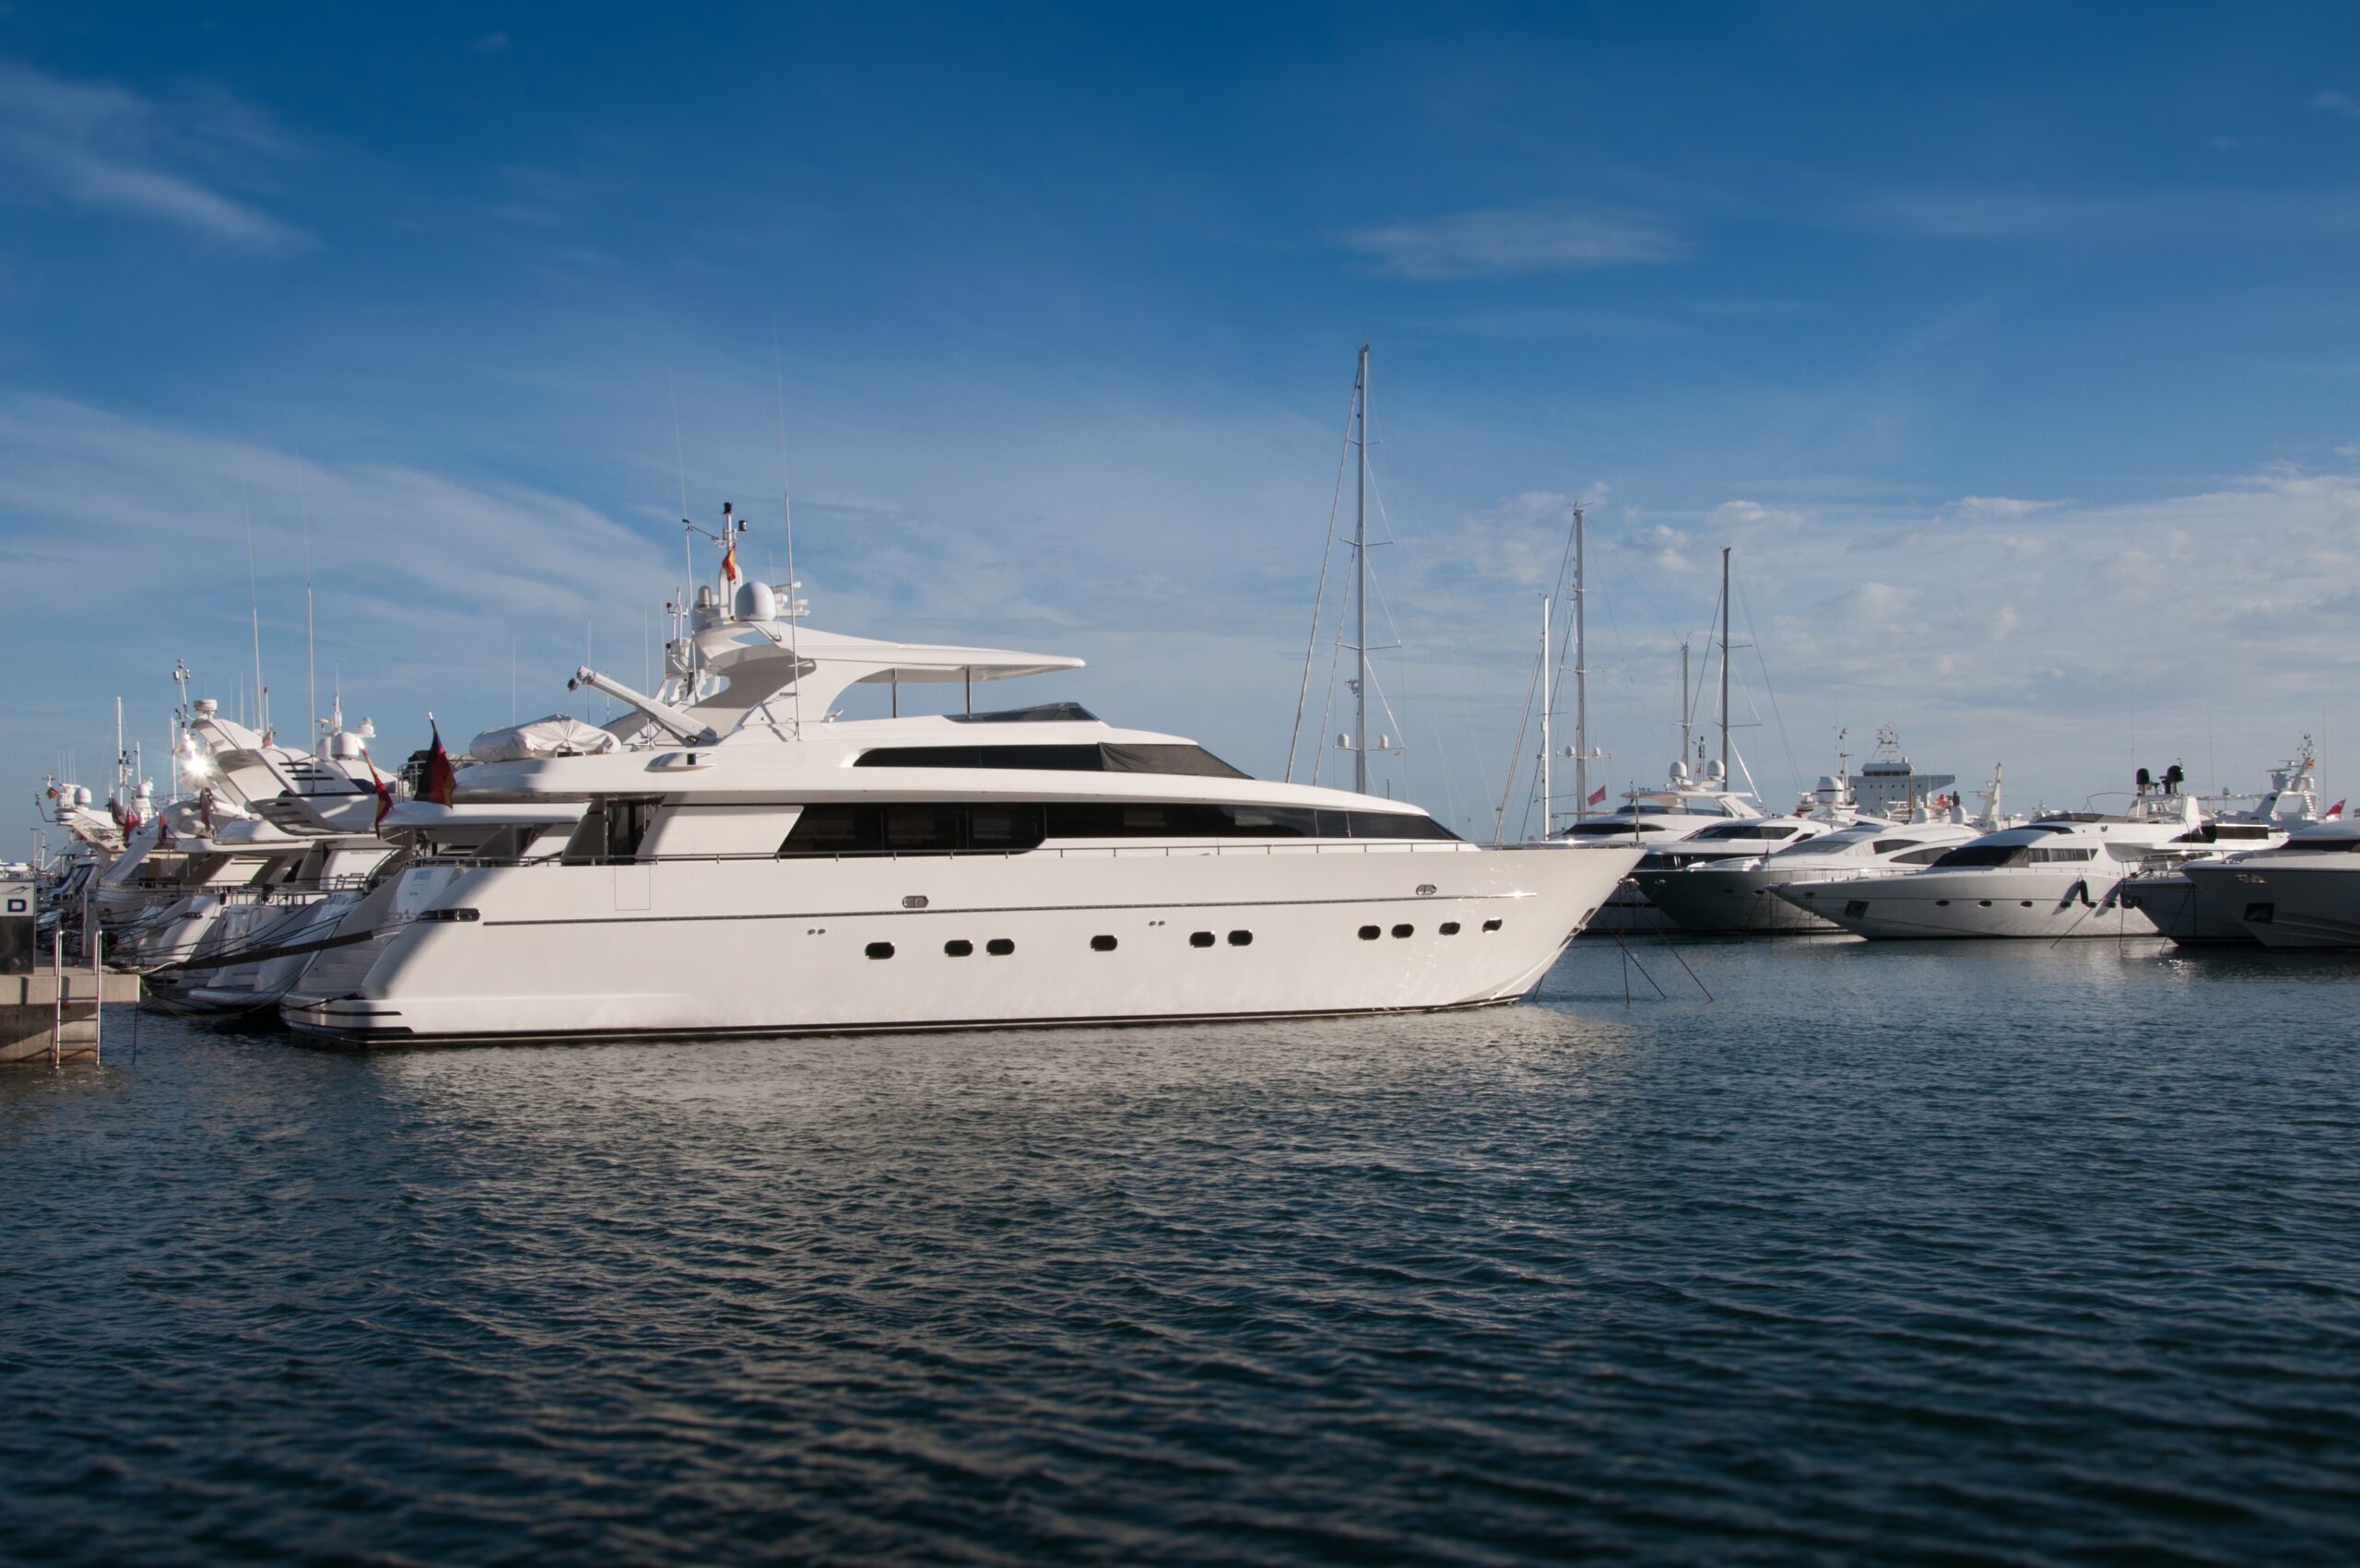 Set Sail and Unwind With Punta Cana Yacht Rental - An Ultimate Guide